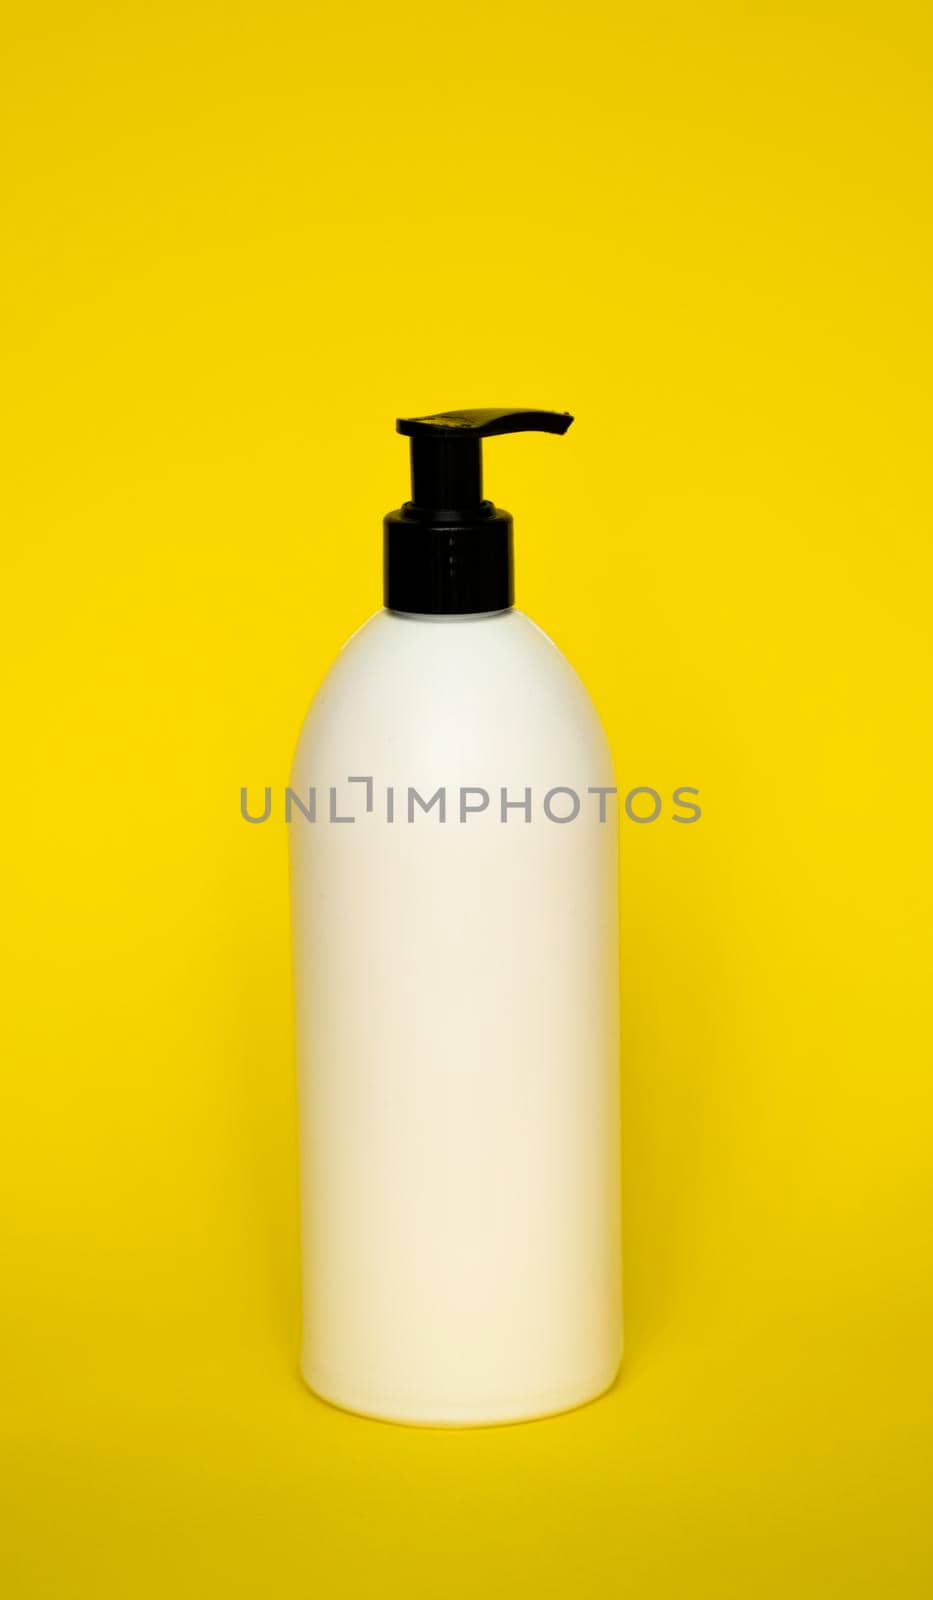 White plastic soap dispenser pump bottle isolated on yellow background. Skin care lotion. Bathing essential product. Shampoo bottle. Bath and body lotion. Fine liquid hand wash. Bathroom accessories. by vovsht